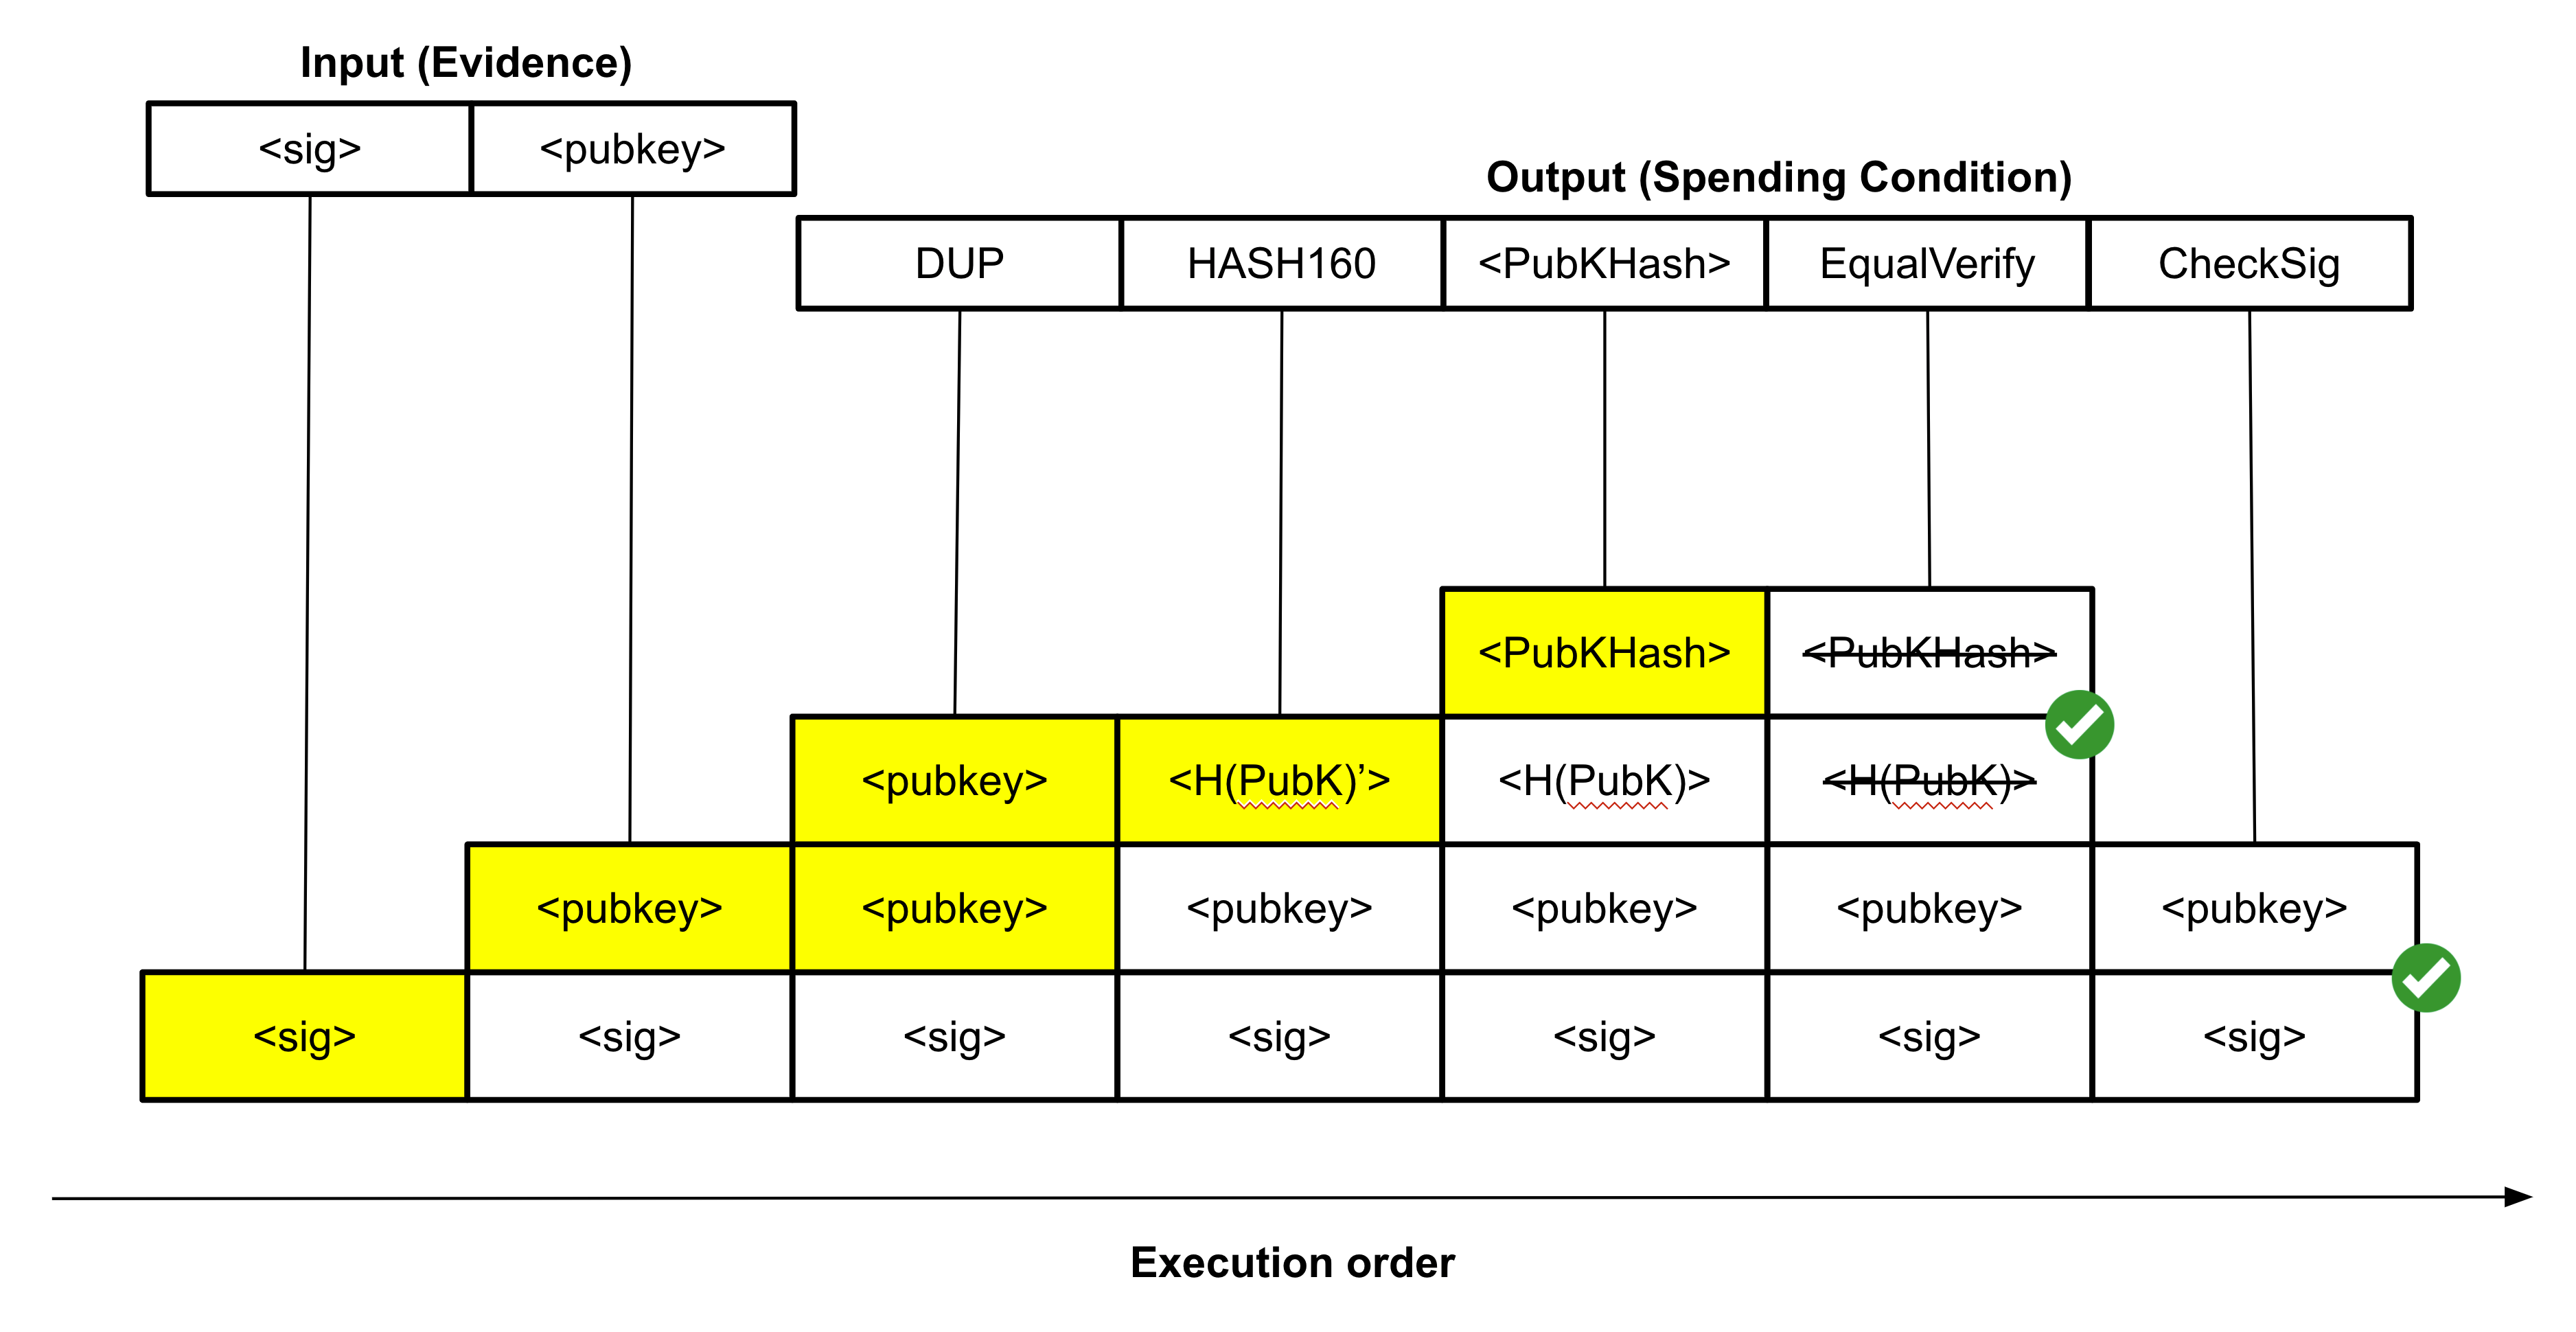 Figure 4: An execution transcript for a "pay-to-pubkey hash" (P2PKH) transaction.